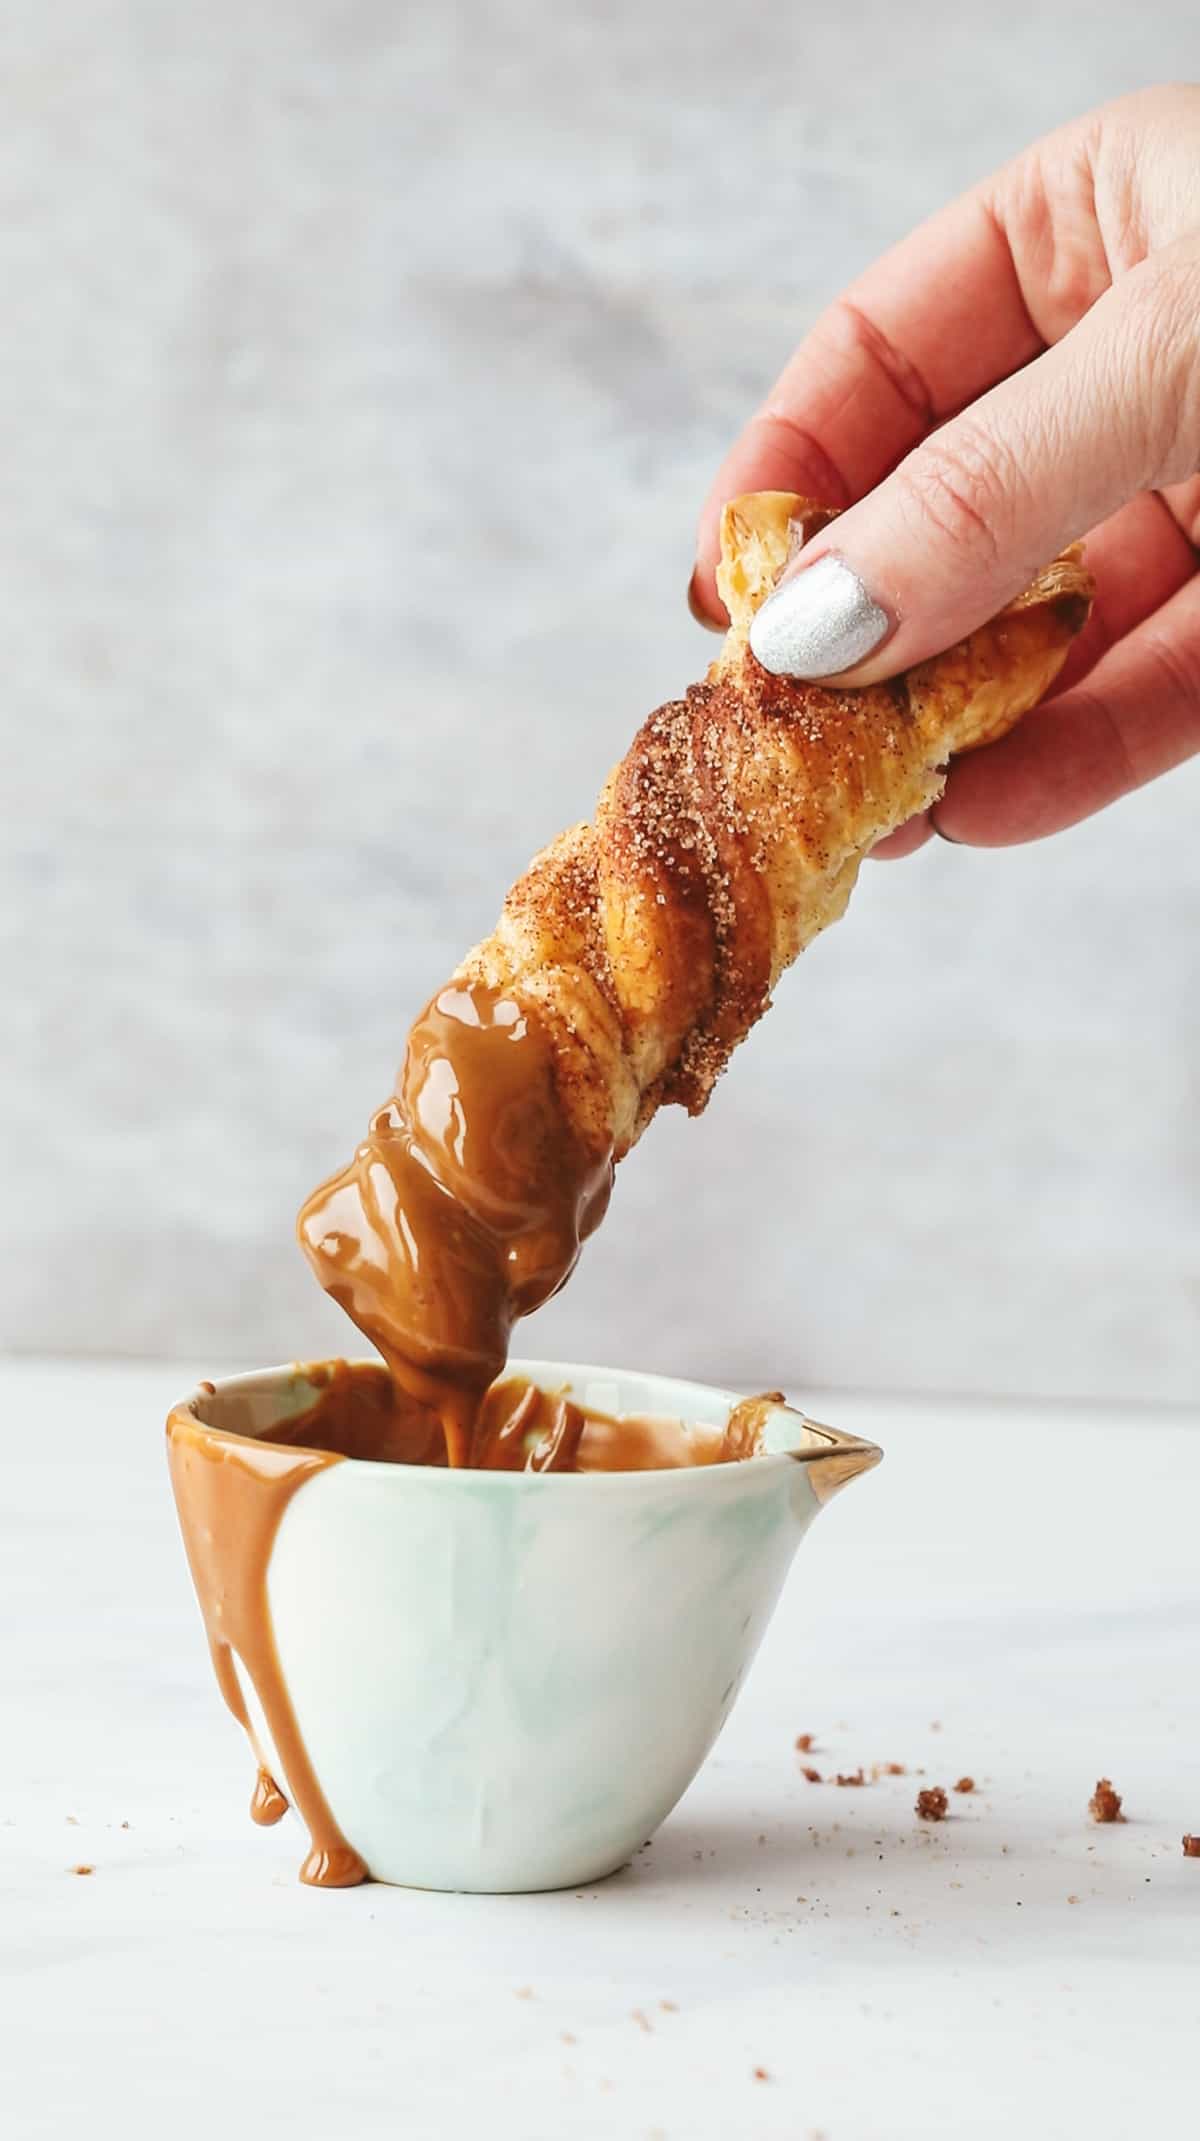 Holding a churro stick and dipping it into warm biscoff spread. 